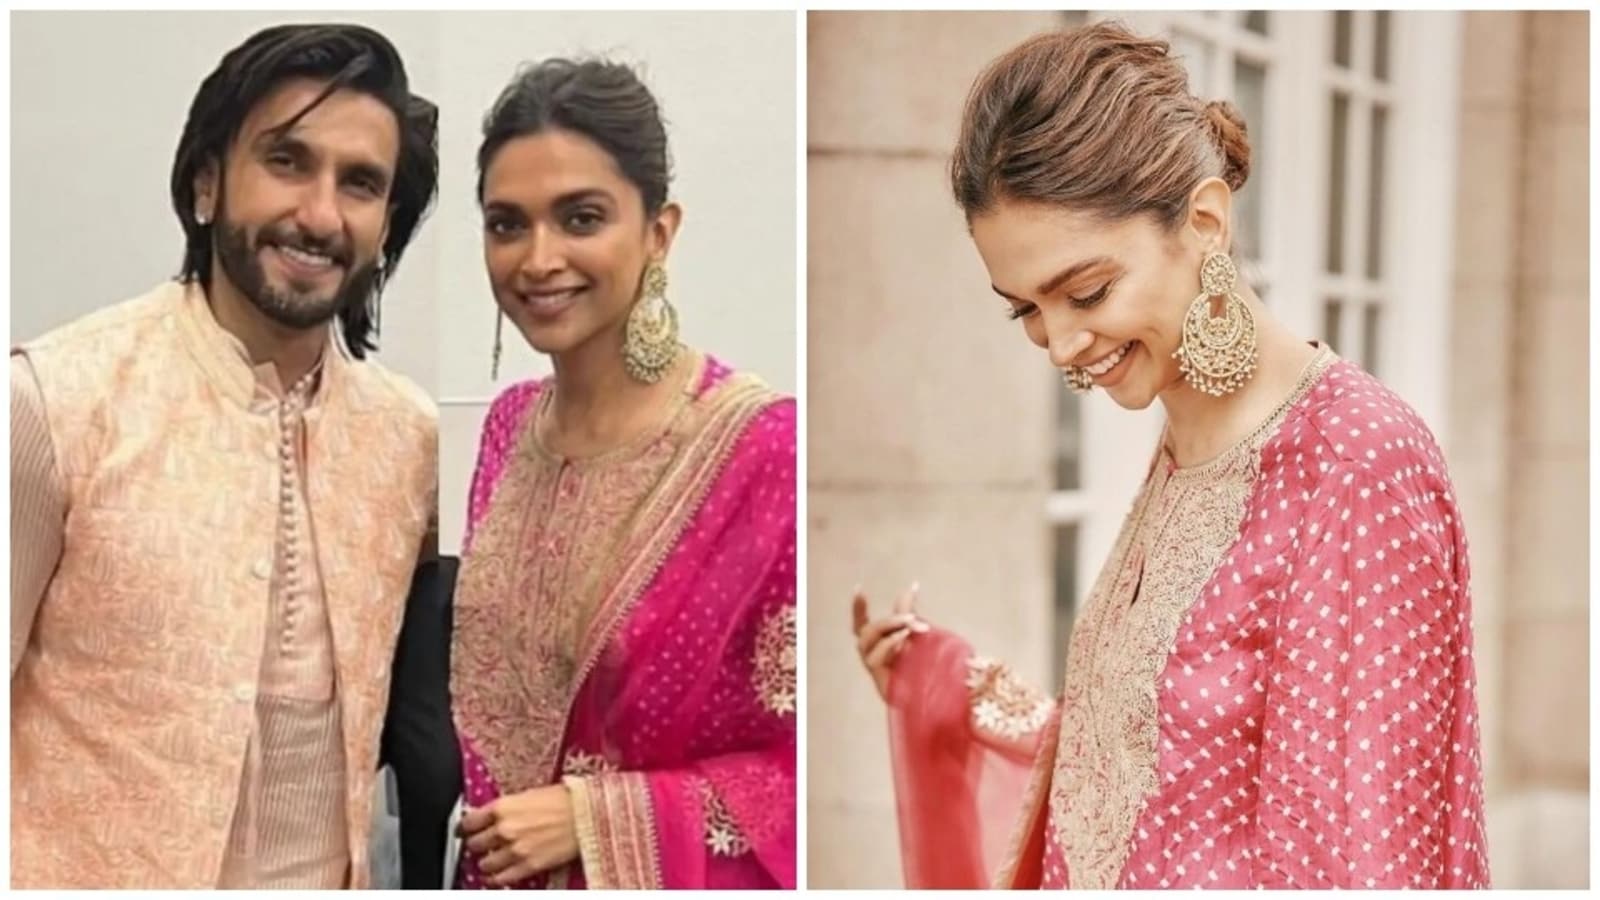 Deepika Padukone takes over California with Ranveer Singh in an elegant  pink suit set: All pics, video inside | Fashion Trends - Hindustan Times